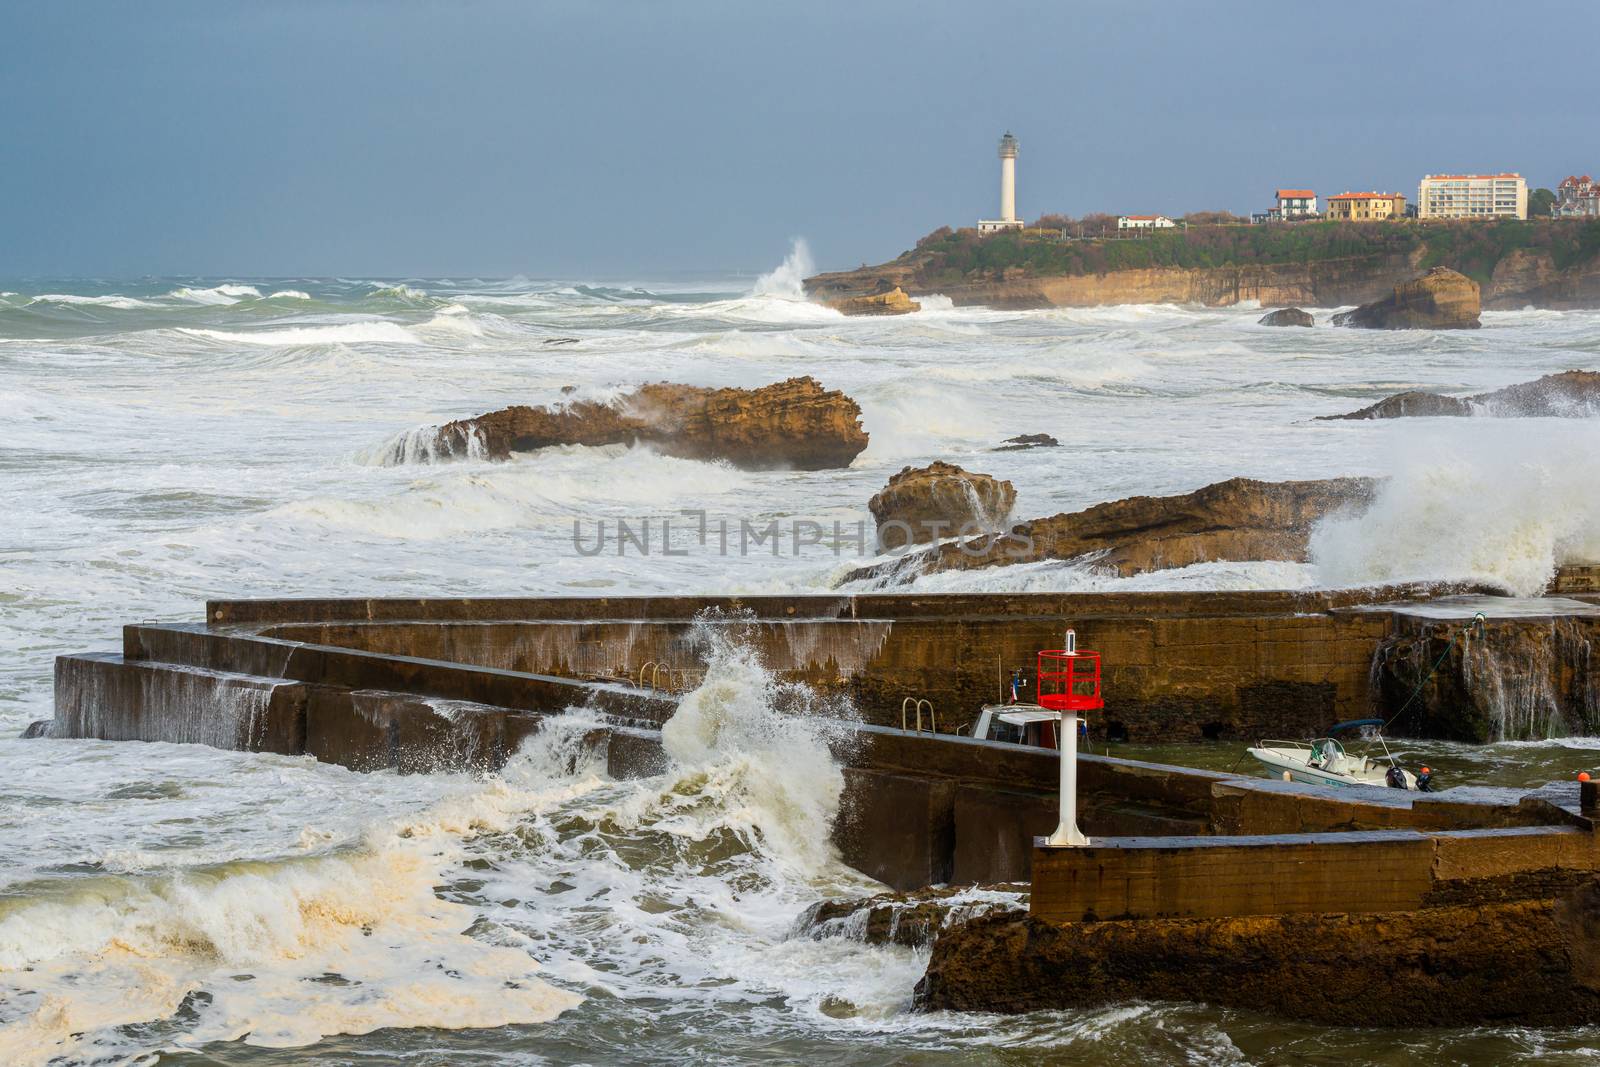 Stormy weather in Biarritz, France by dutourdumonde